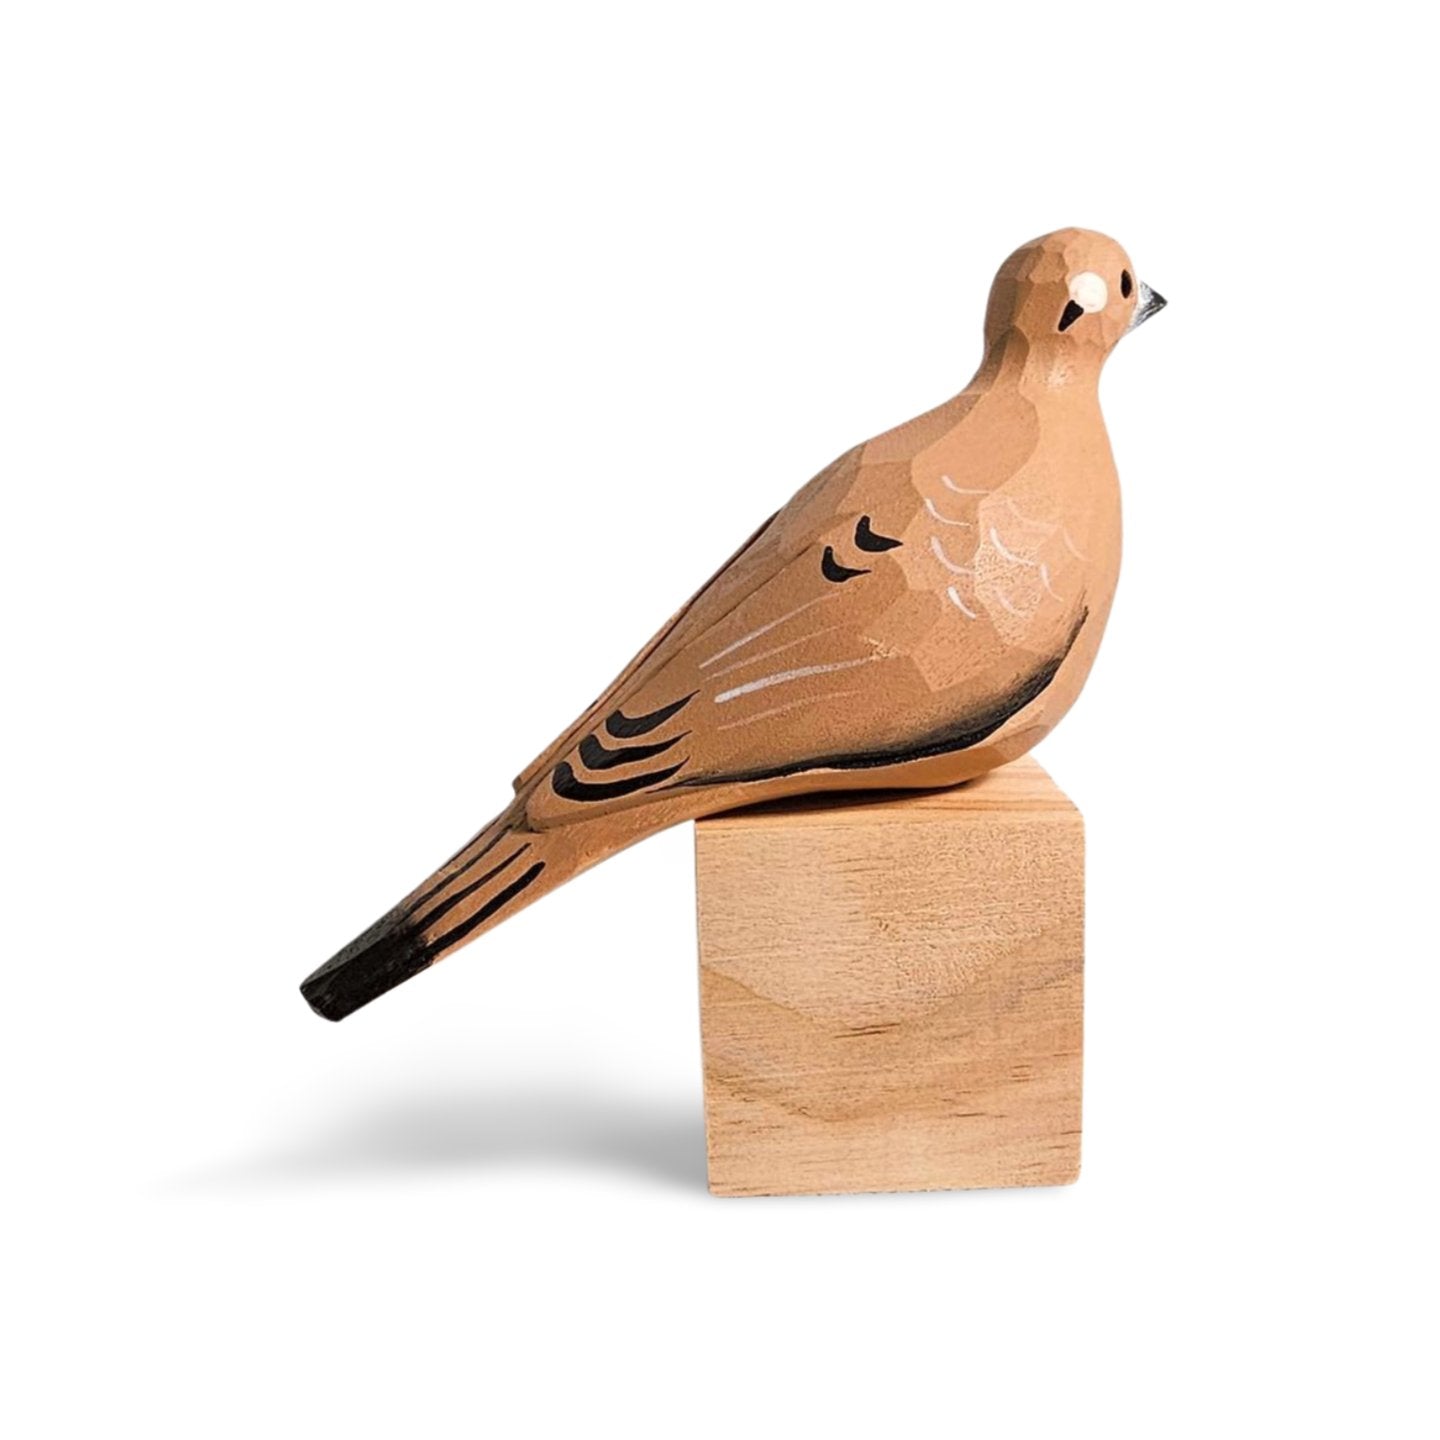 Mourning Dove Sculpted Hand-Painted Wood Bird Figure - Wooden Islands